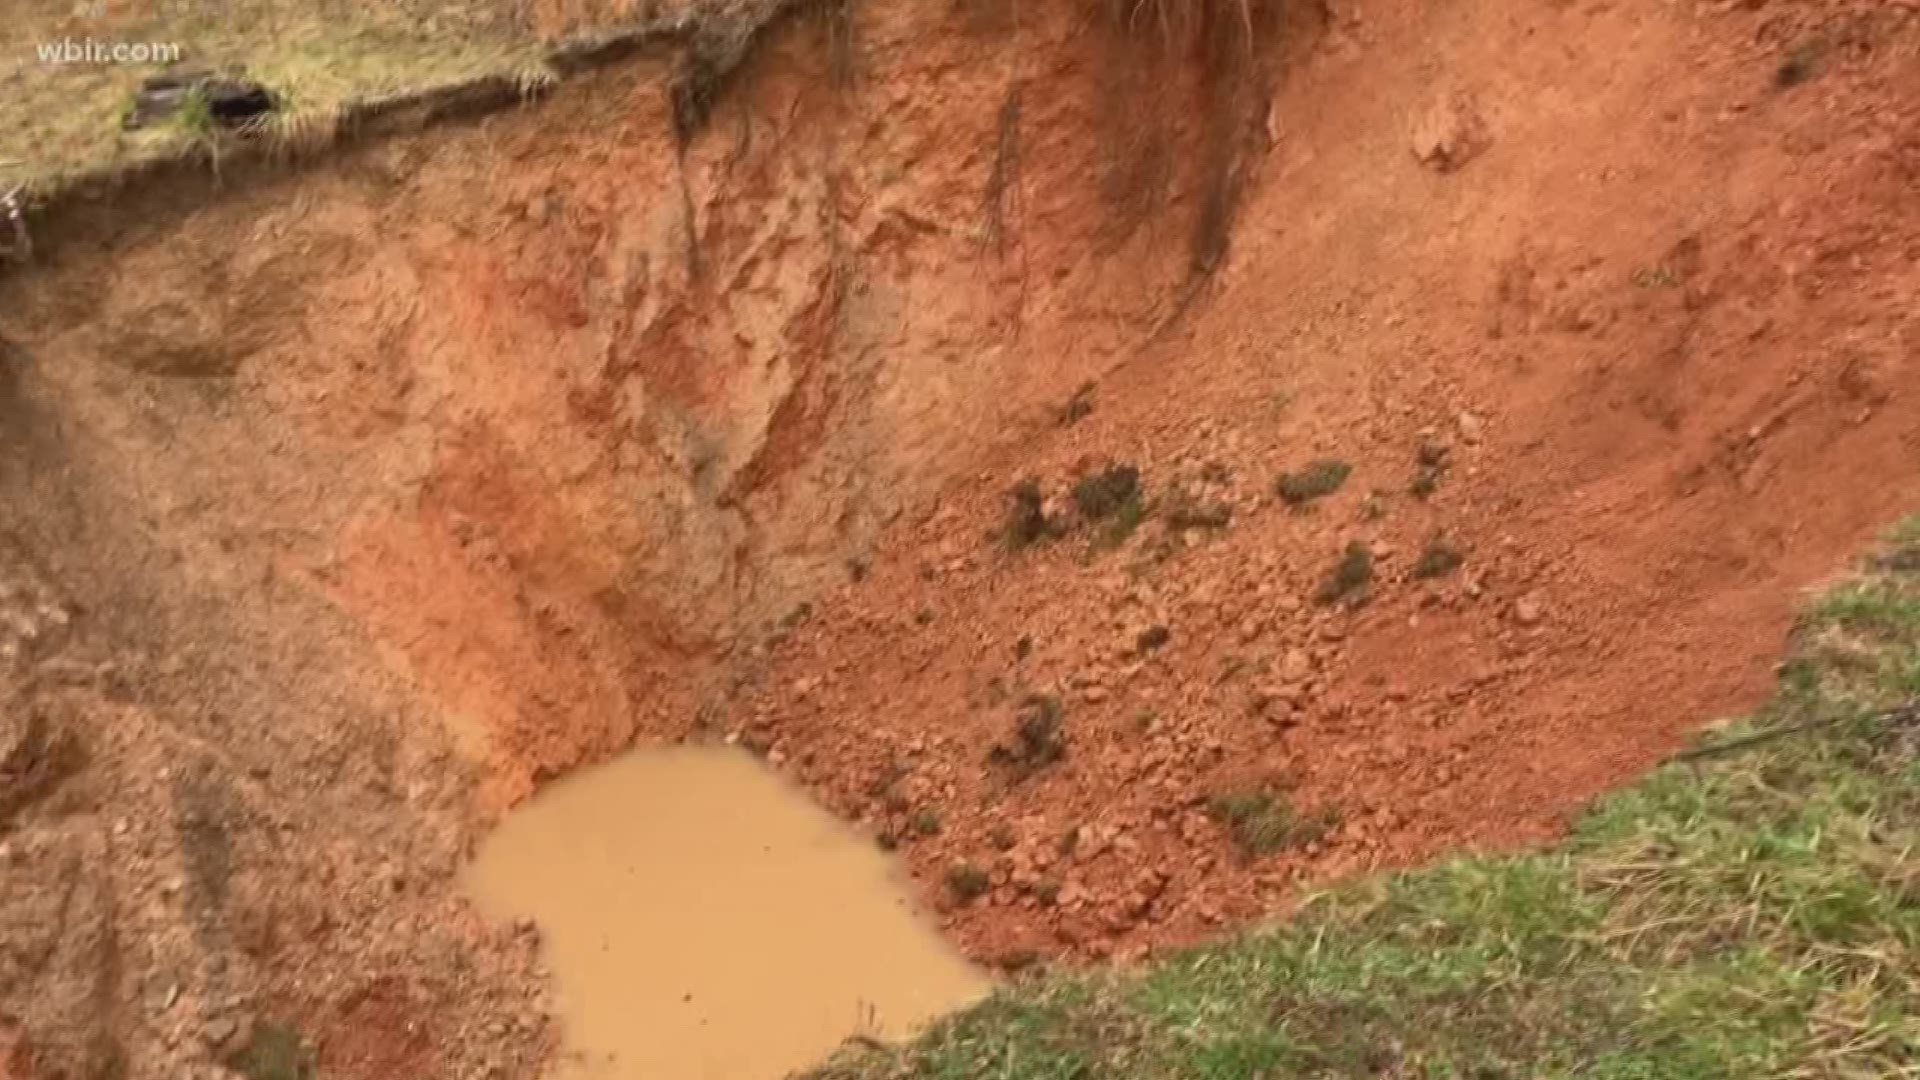 The massive sinkhole is located near the spring where the city gets its water.